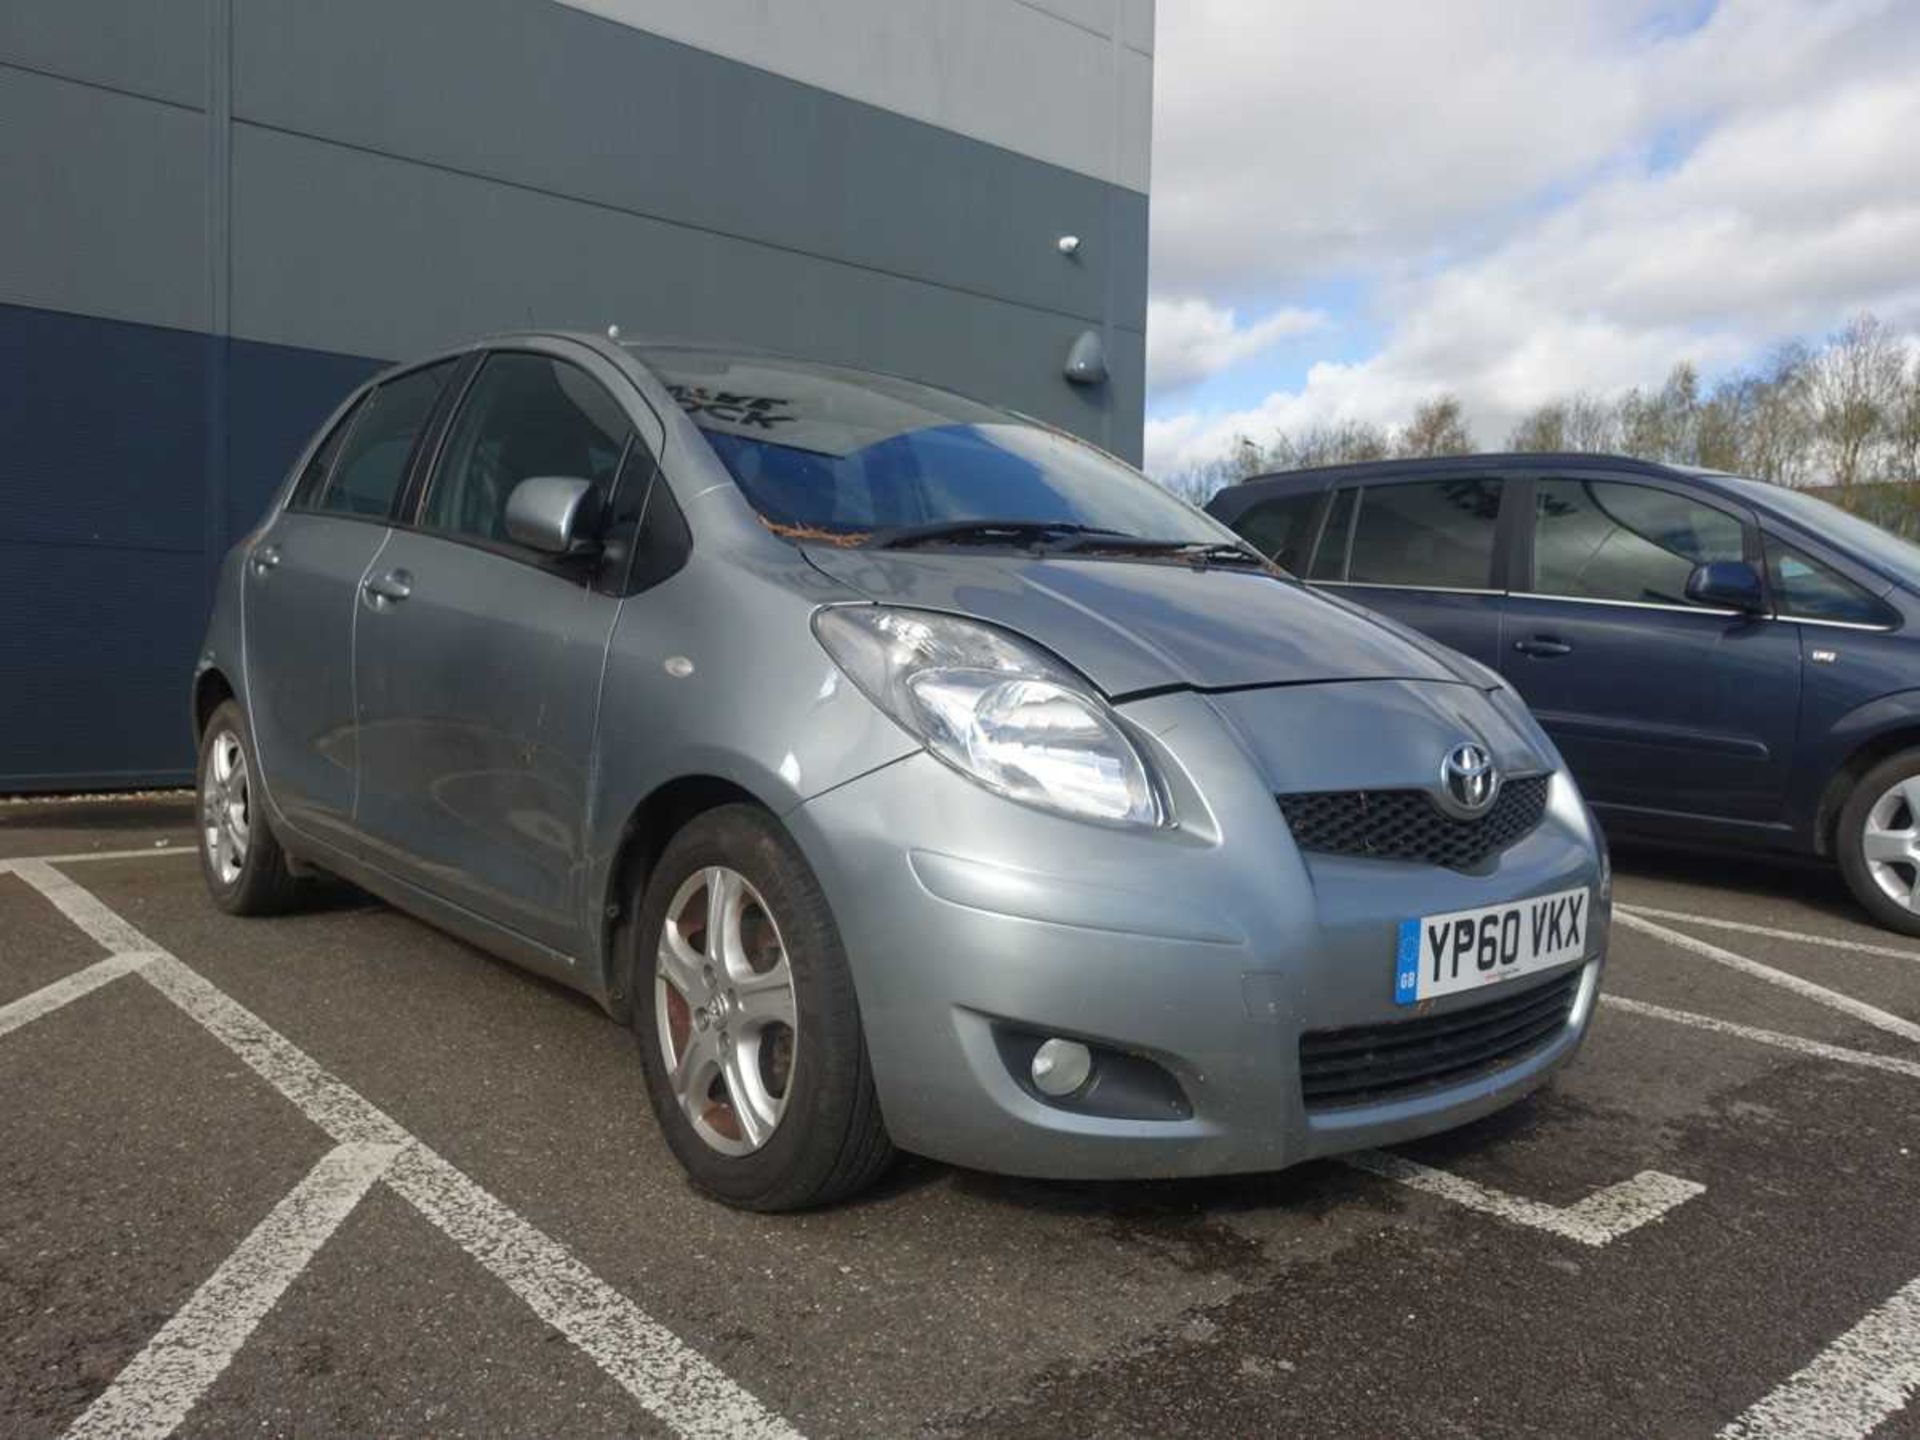 (YP60 VKX) Toyota Yaris TR VVT-1 S-A in silver, first registered 09/02/2011, 6 speed semi auto, 5